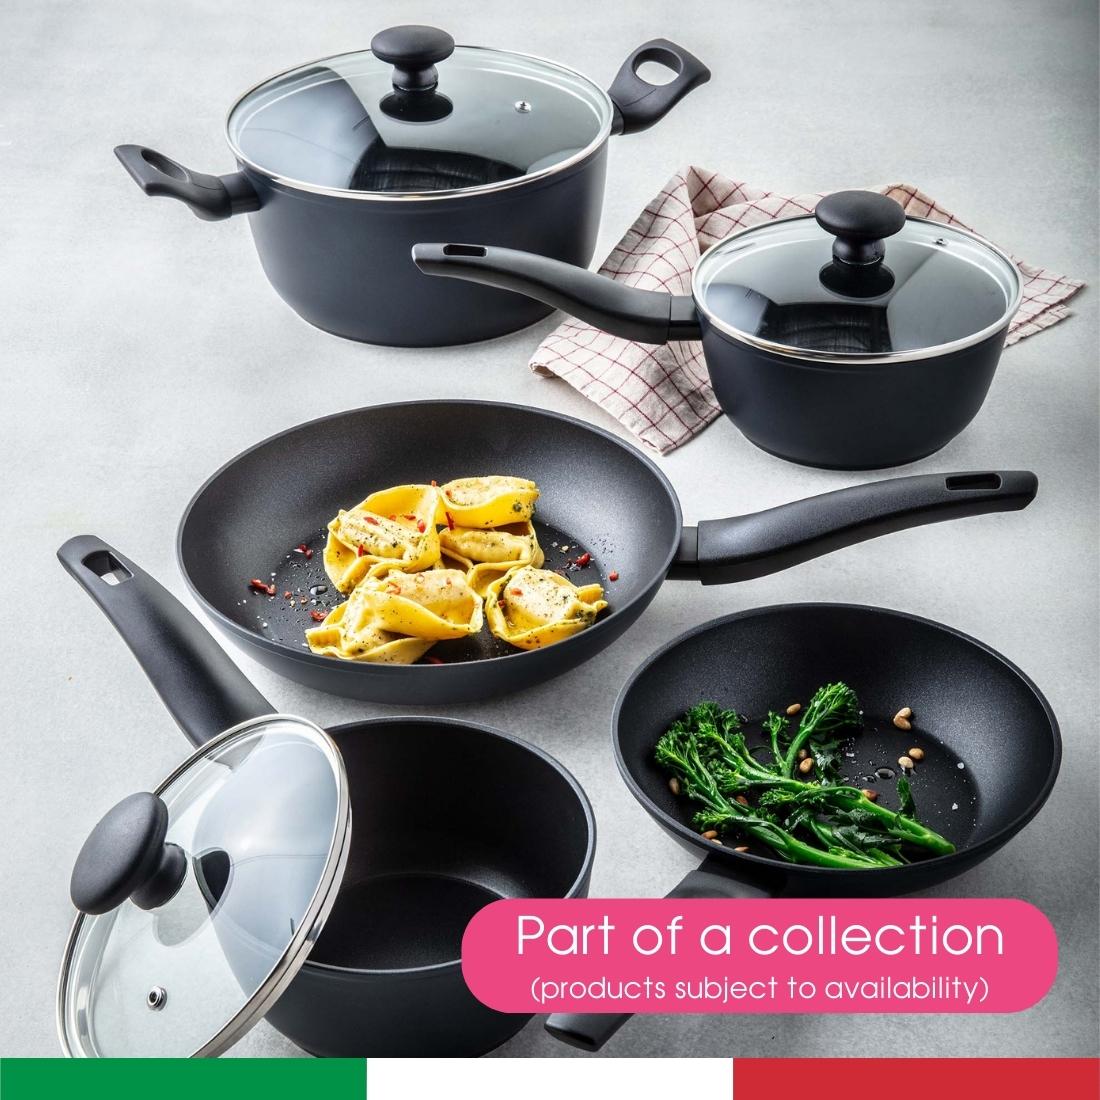 RACO Minerale Nonstick Induction Frypan 20cm